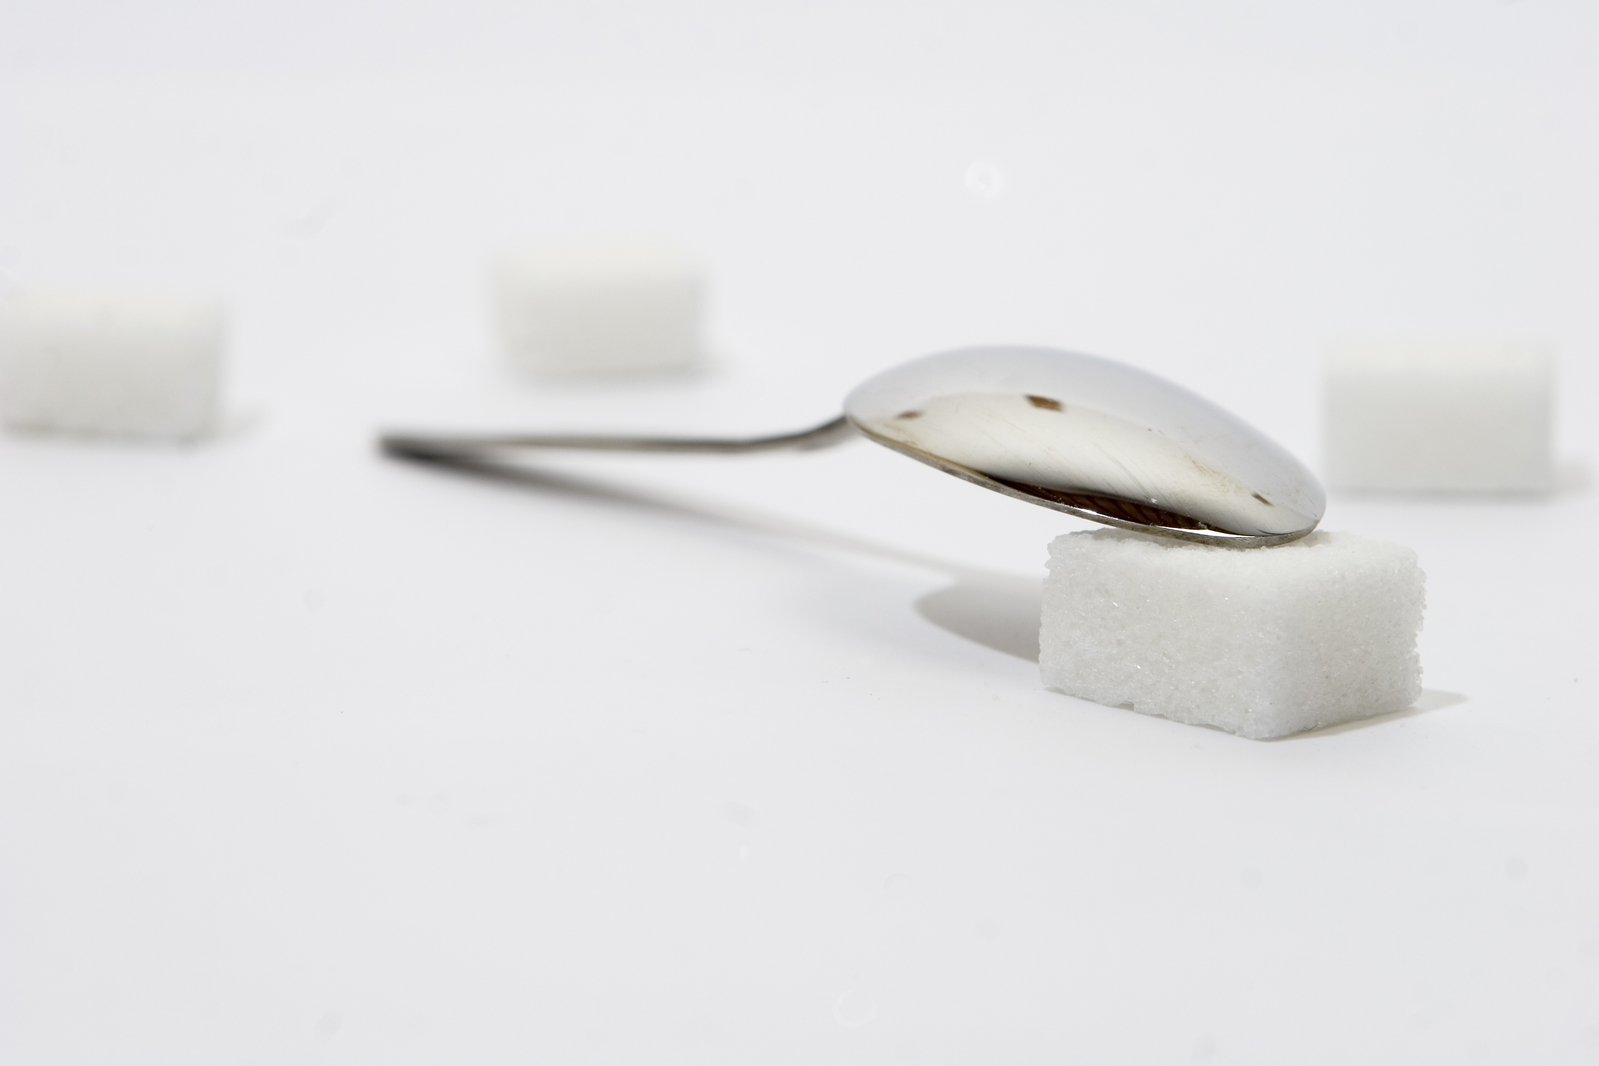 some spoons and cubes of sugar sitting on a white table